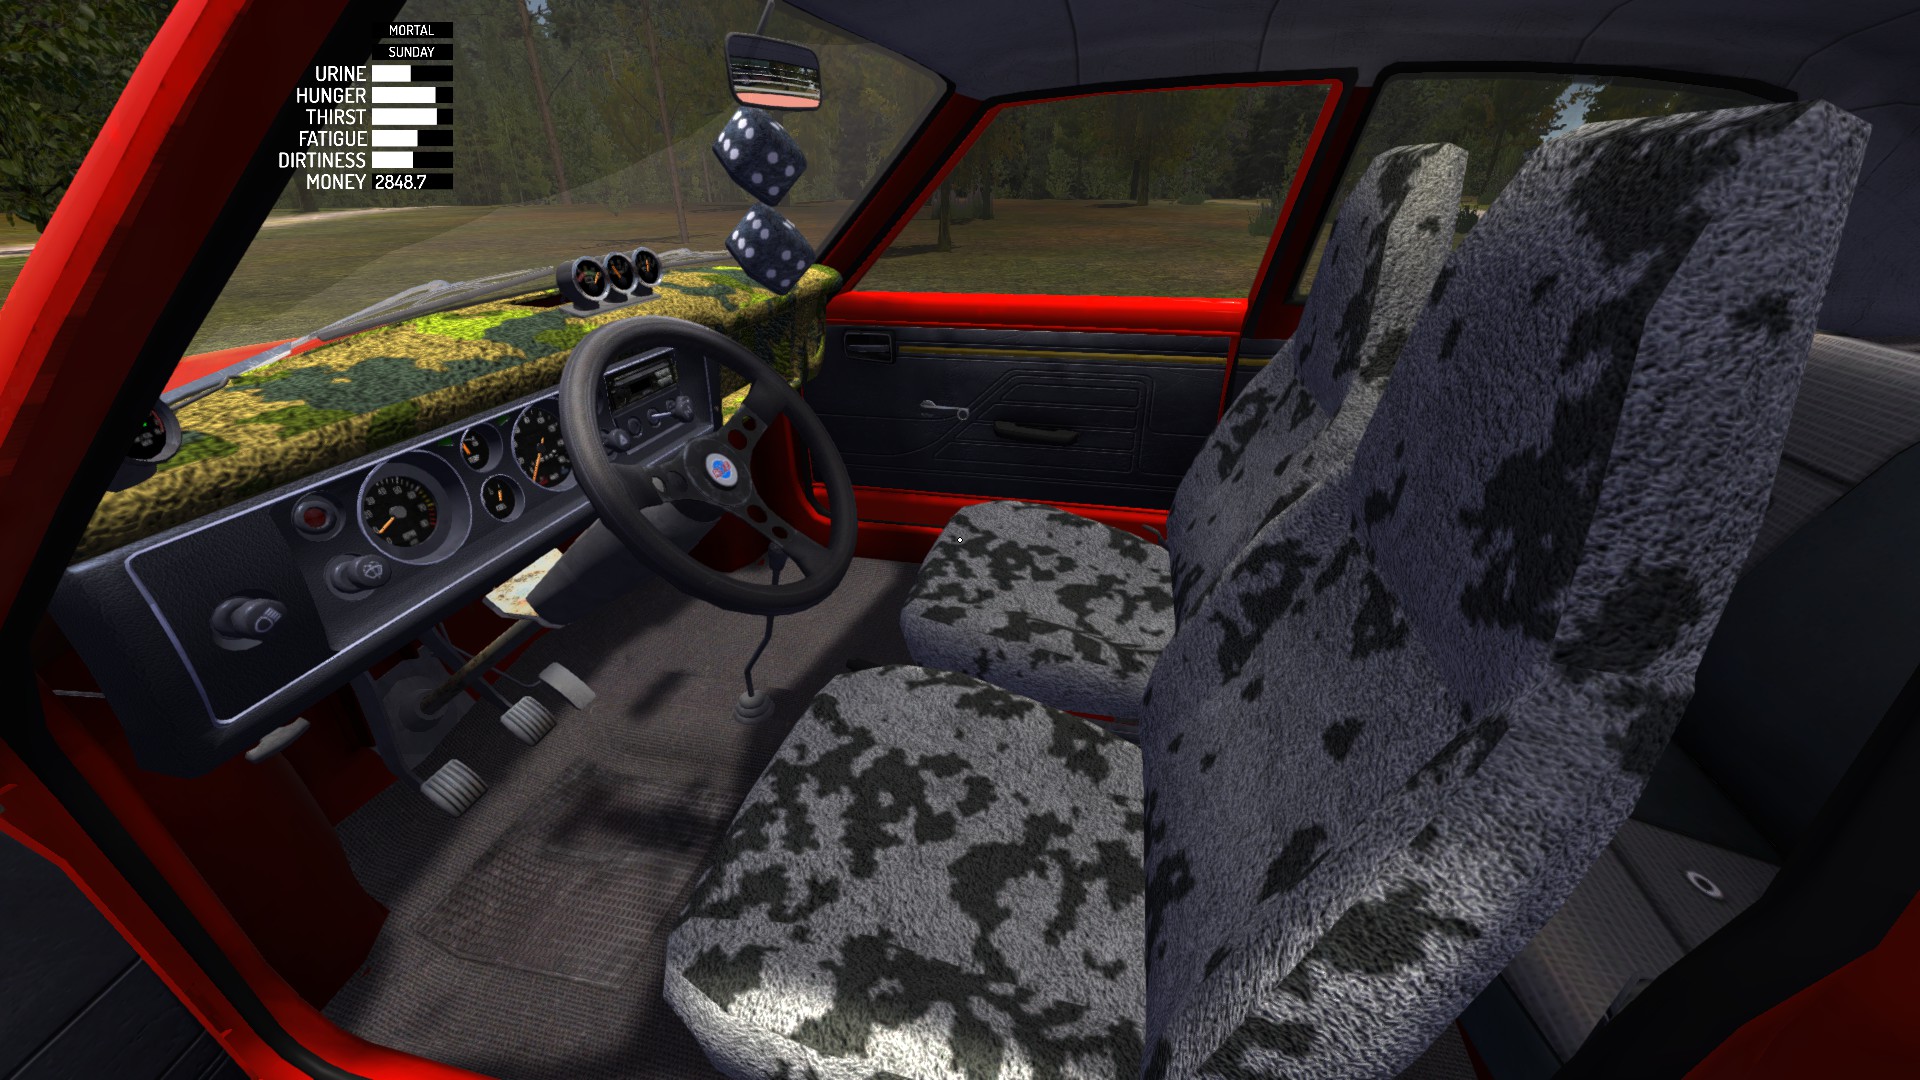 So I Replaced Some Textures On The Interior Of The Satsuma